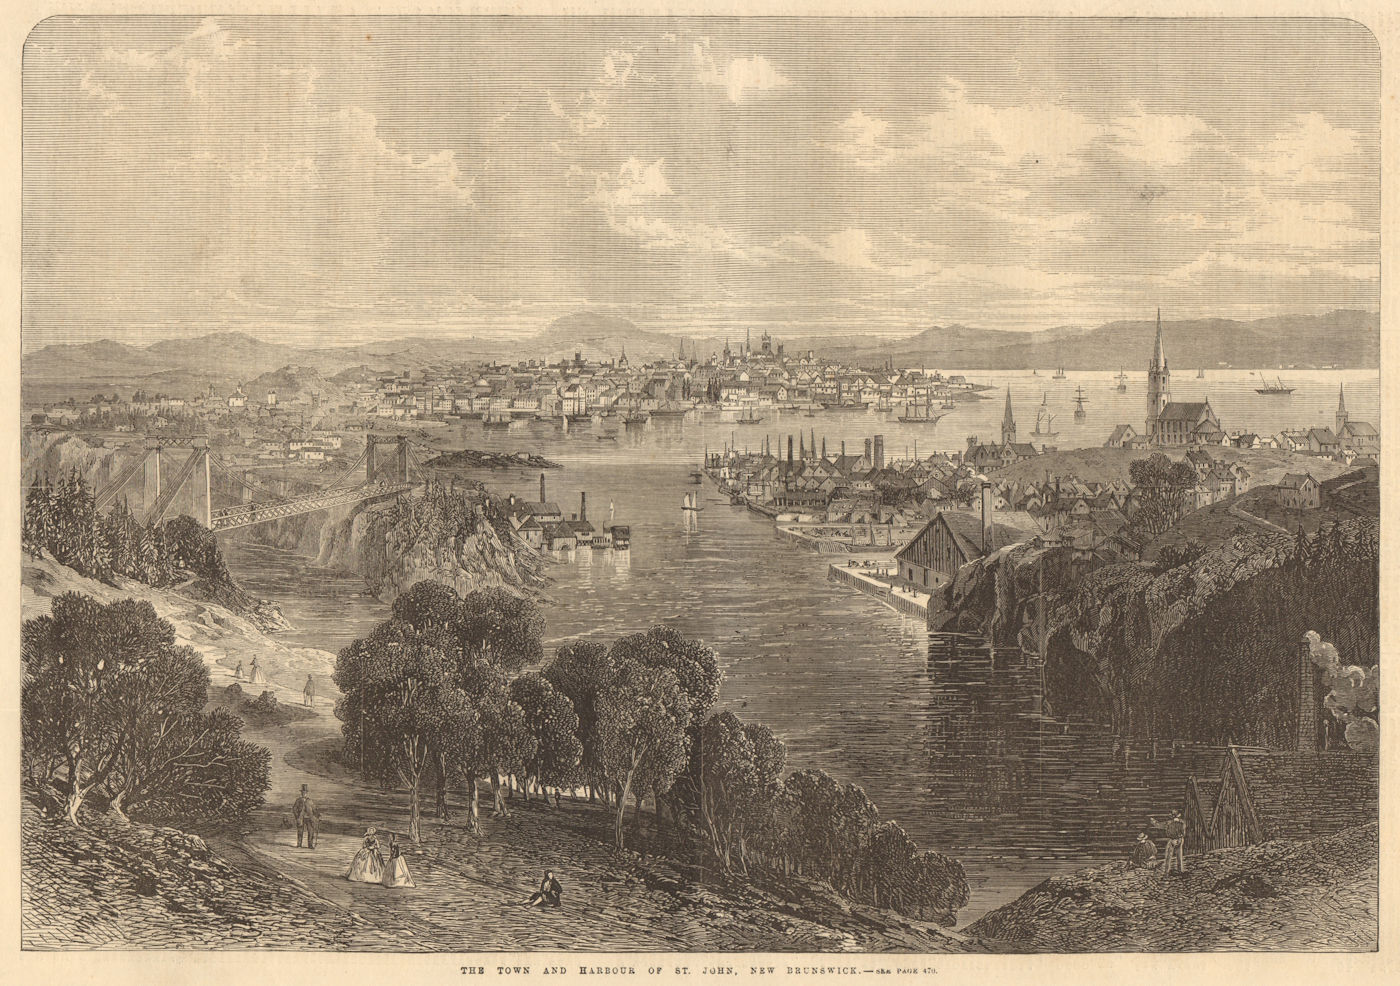 Associate Product The town & harbour of St. John, New Brunswick. Canada 1866 ILN full page print